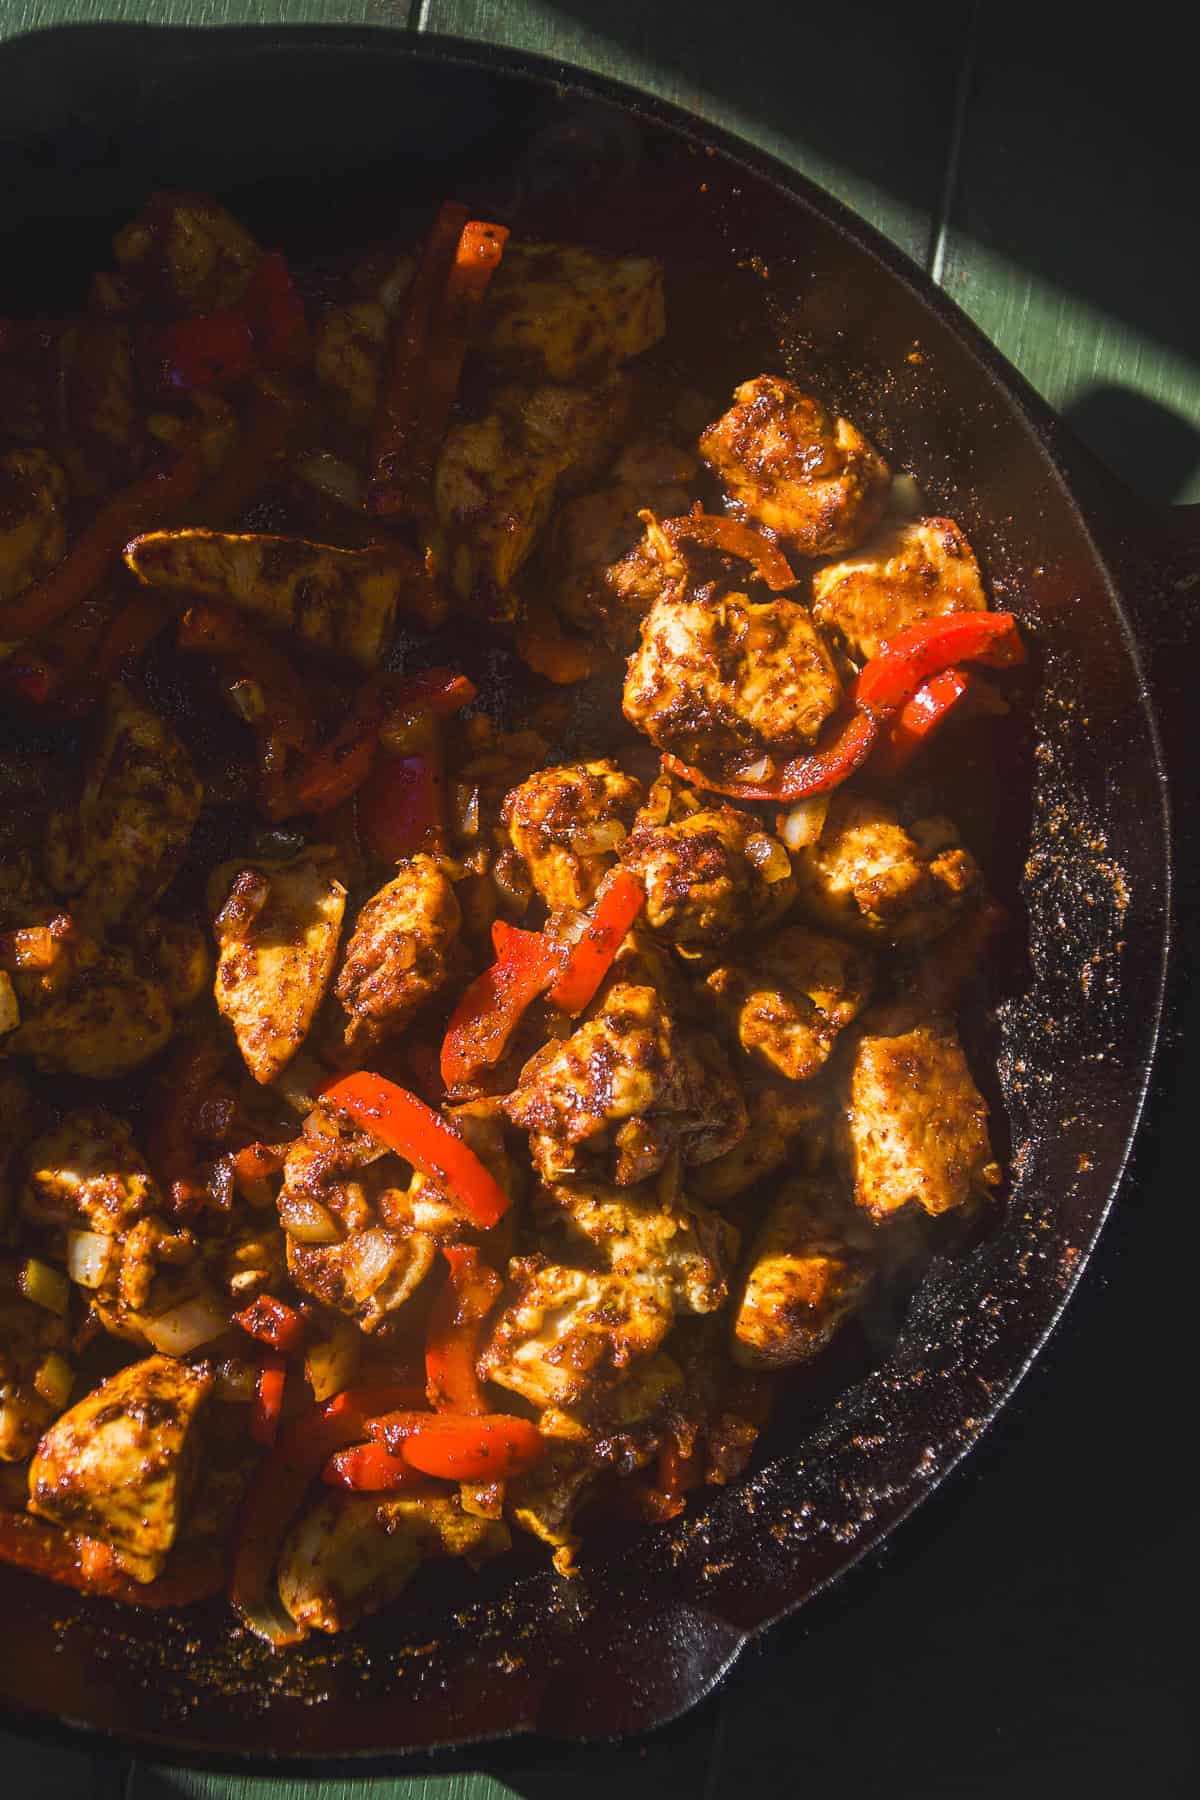 Chicken tossed with taco seasonings and red bell peppers.